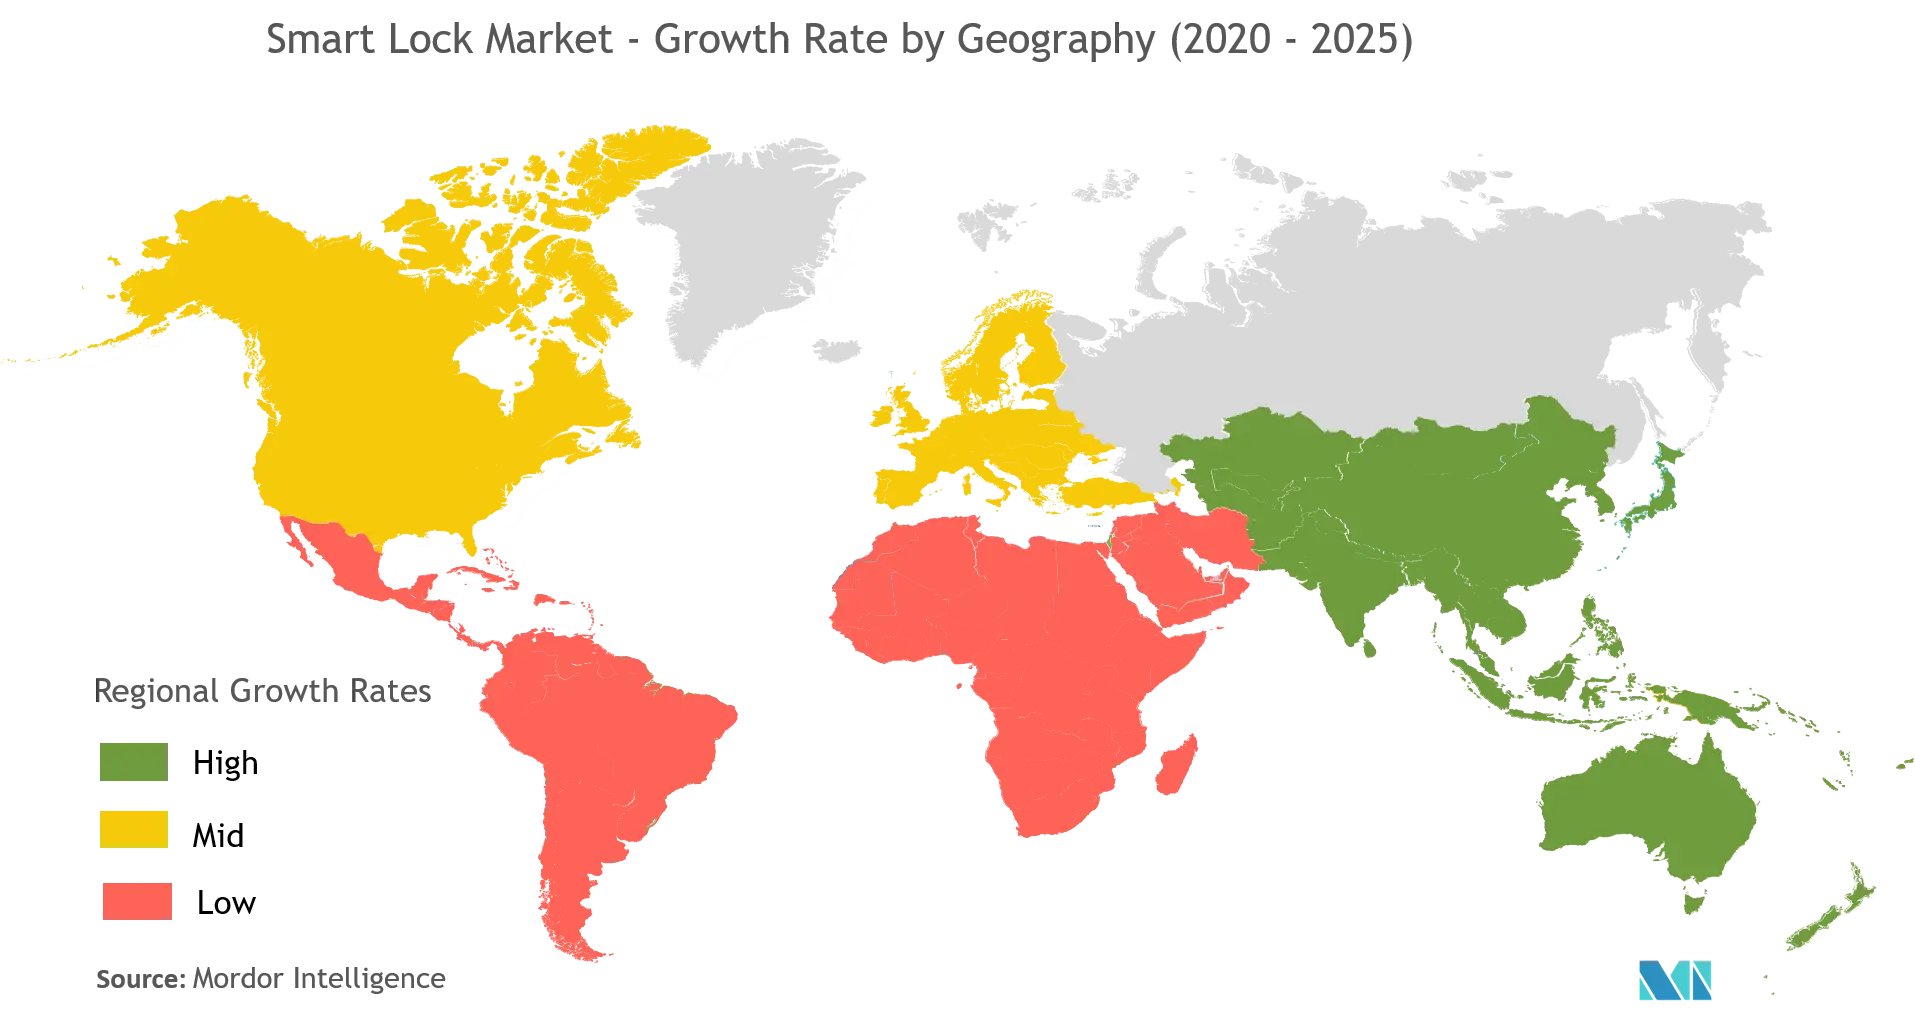 Smart Lock Market - Growth Rate by Geography (2020 - 2025)